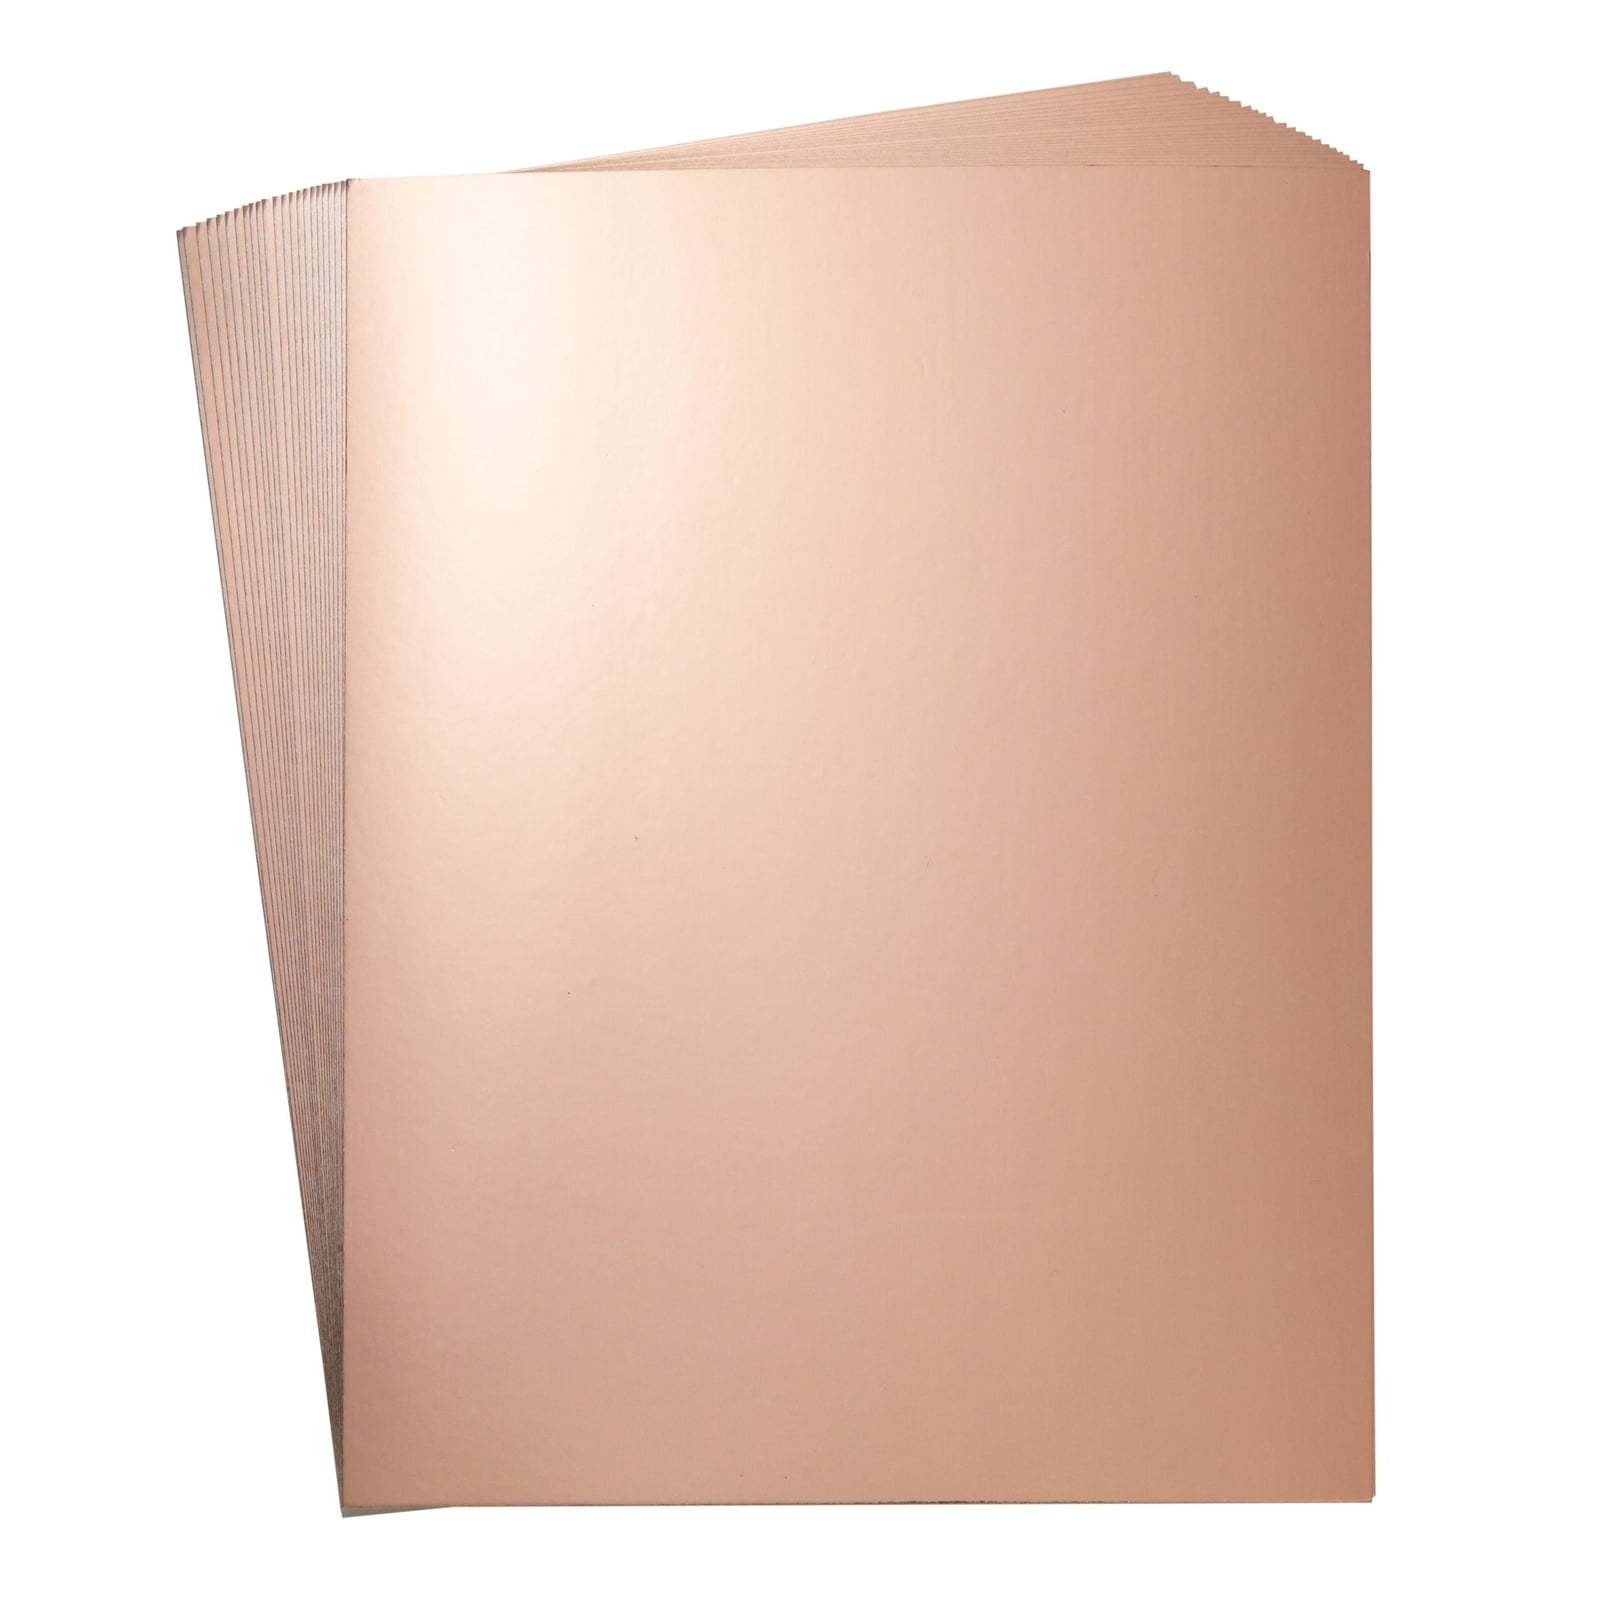 Foil Cardstock - 24-Pack Rose Gold Foil Metallic Mirror Board Sheets for  Arts and Crafts, 8.5 x 11 Inches, 350gsm Letter Sized Poster Board,  Scrapbook